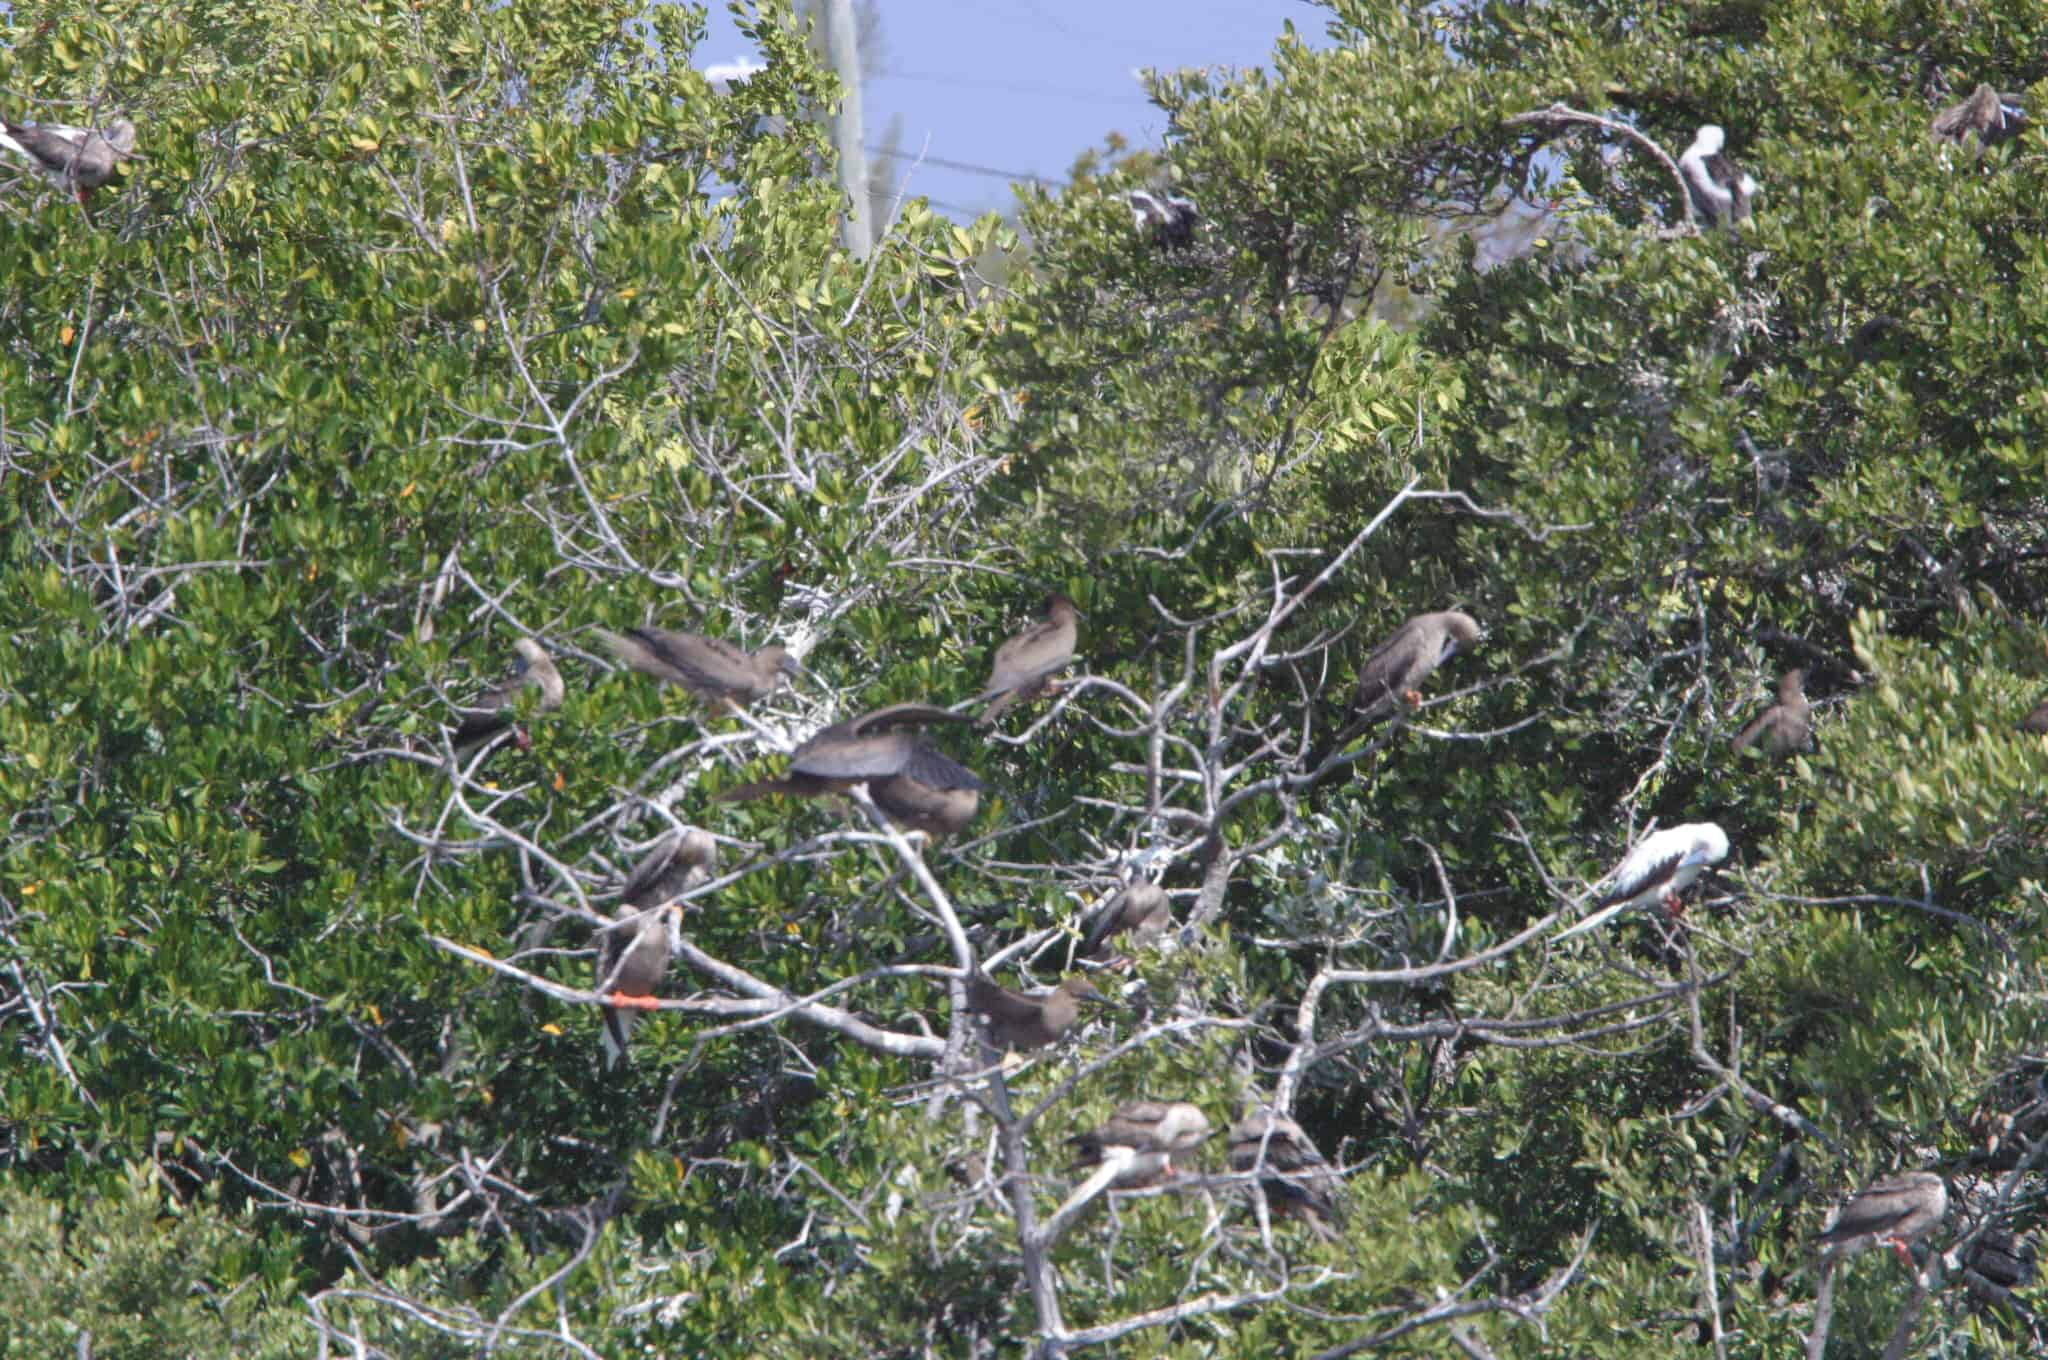 Red-footed and brown boobies nesting in a small part of the colony at Booby Pond Ramsar Site, Little Cayman.